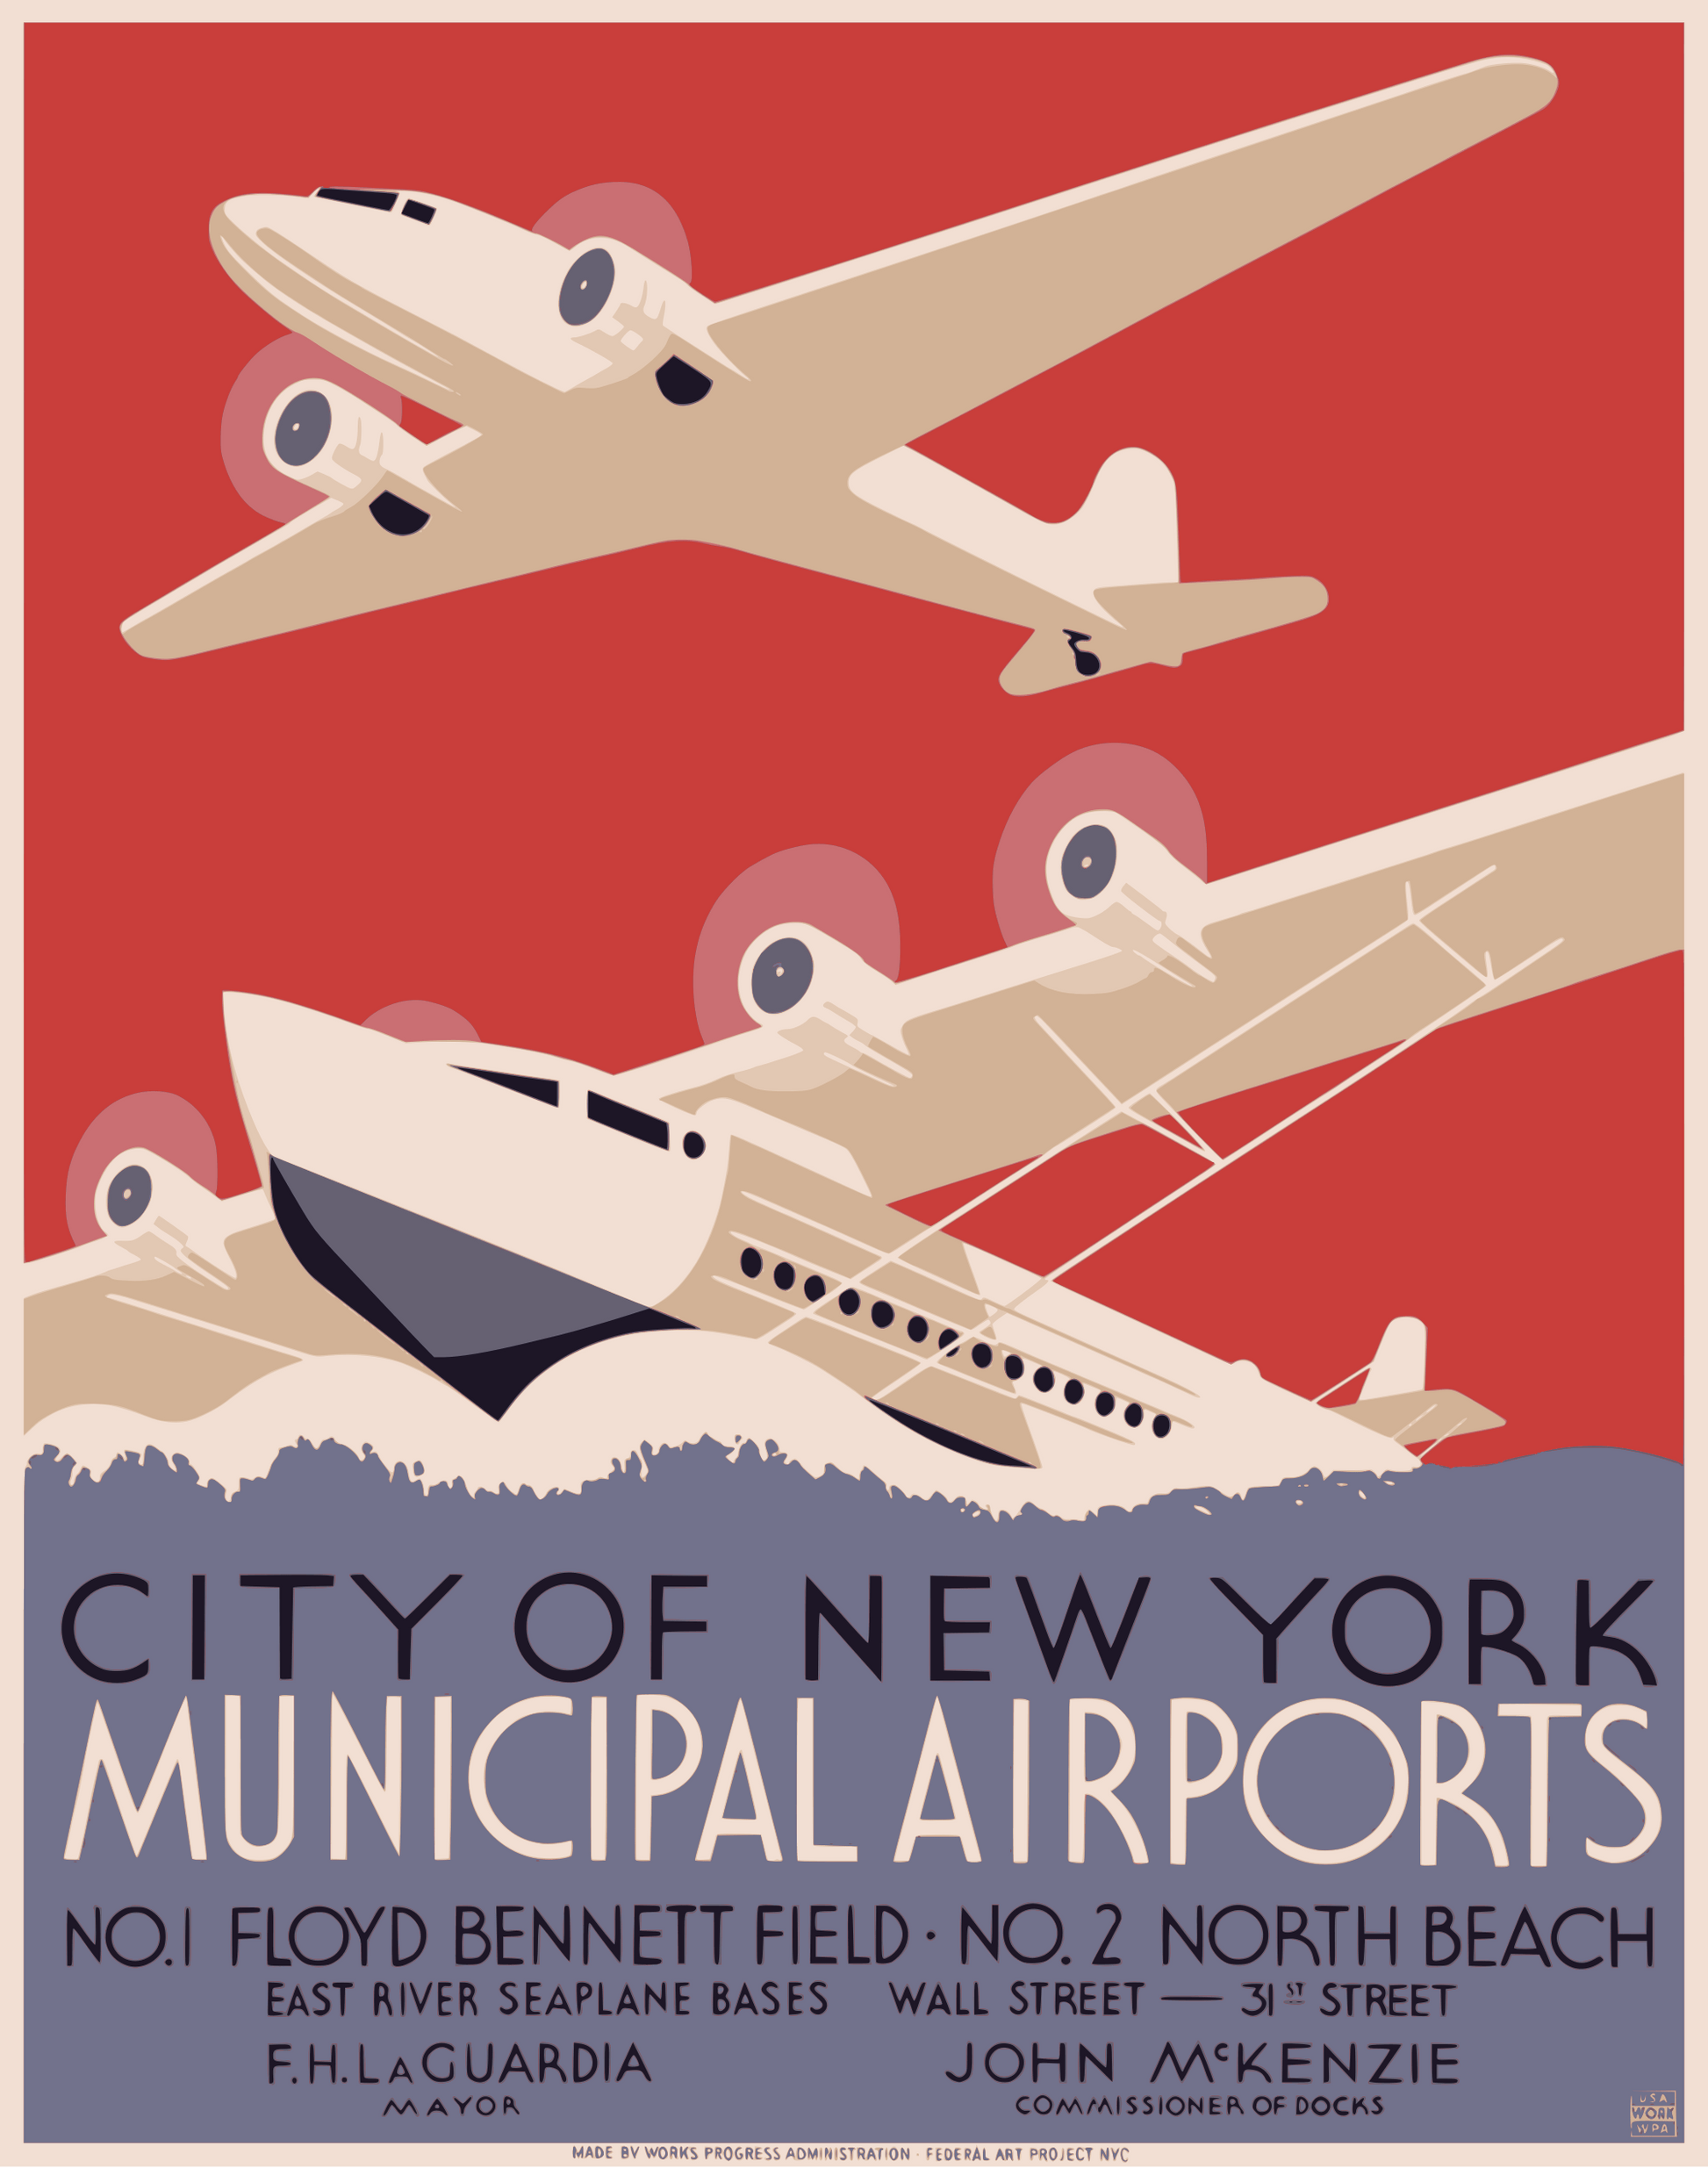 New York Airports poster artwork (1930s) | Harry Herzog Posters, Prints, & Visual Artwork The Trumpet Shop   